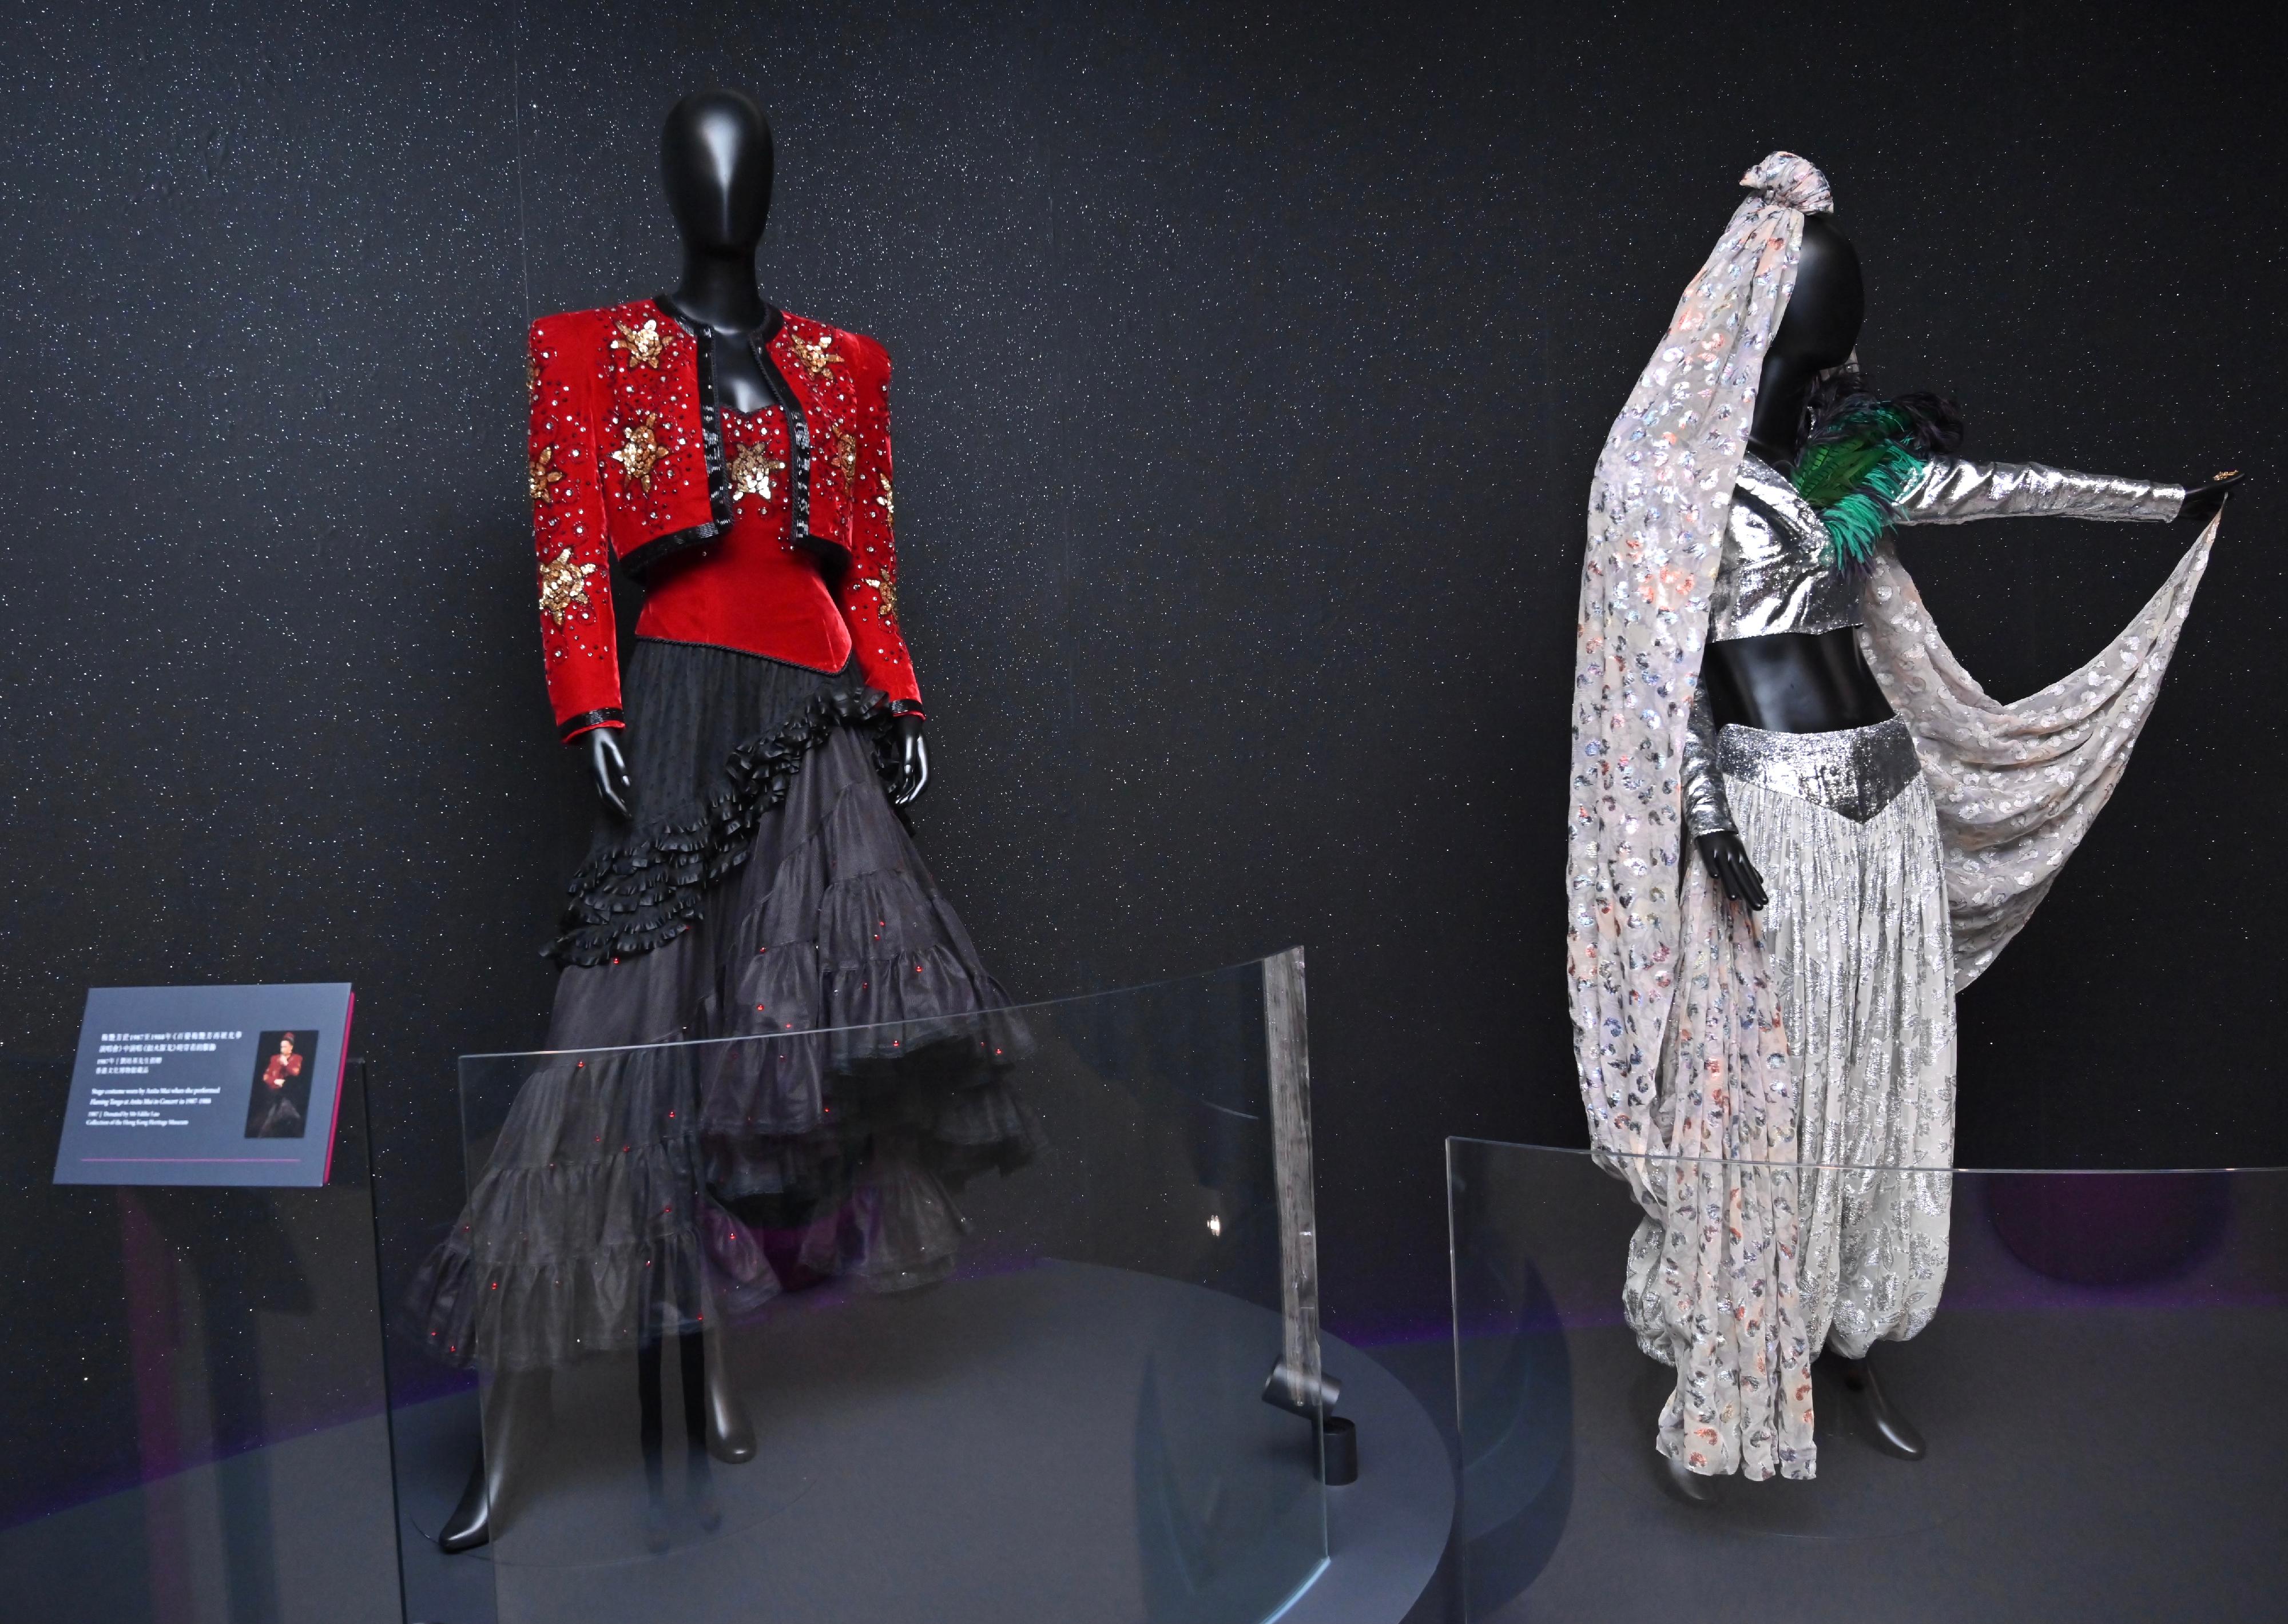 The opening ceremony for the "Timeless Diva: Anita Mui" exhibition was held today (December 23) at the Hong Kong Heritage Museum. Photo shows the classic stage costumes worn by Anita Mui.